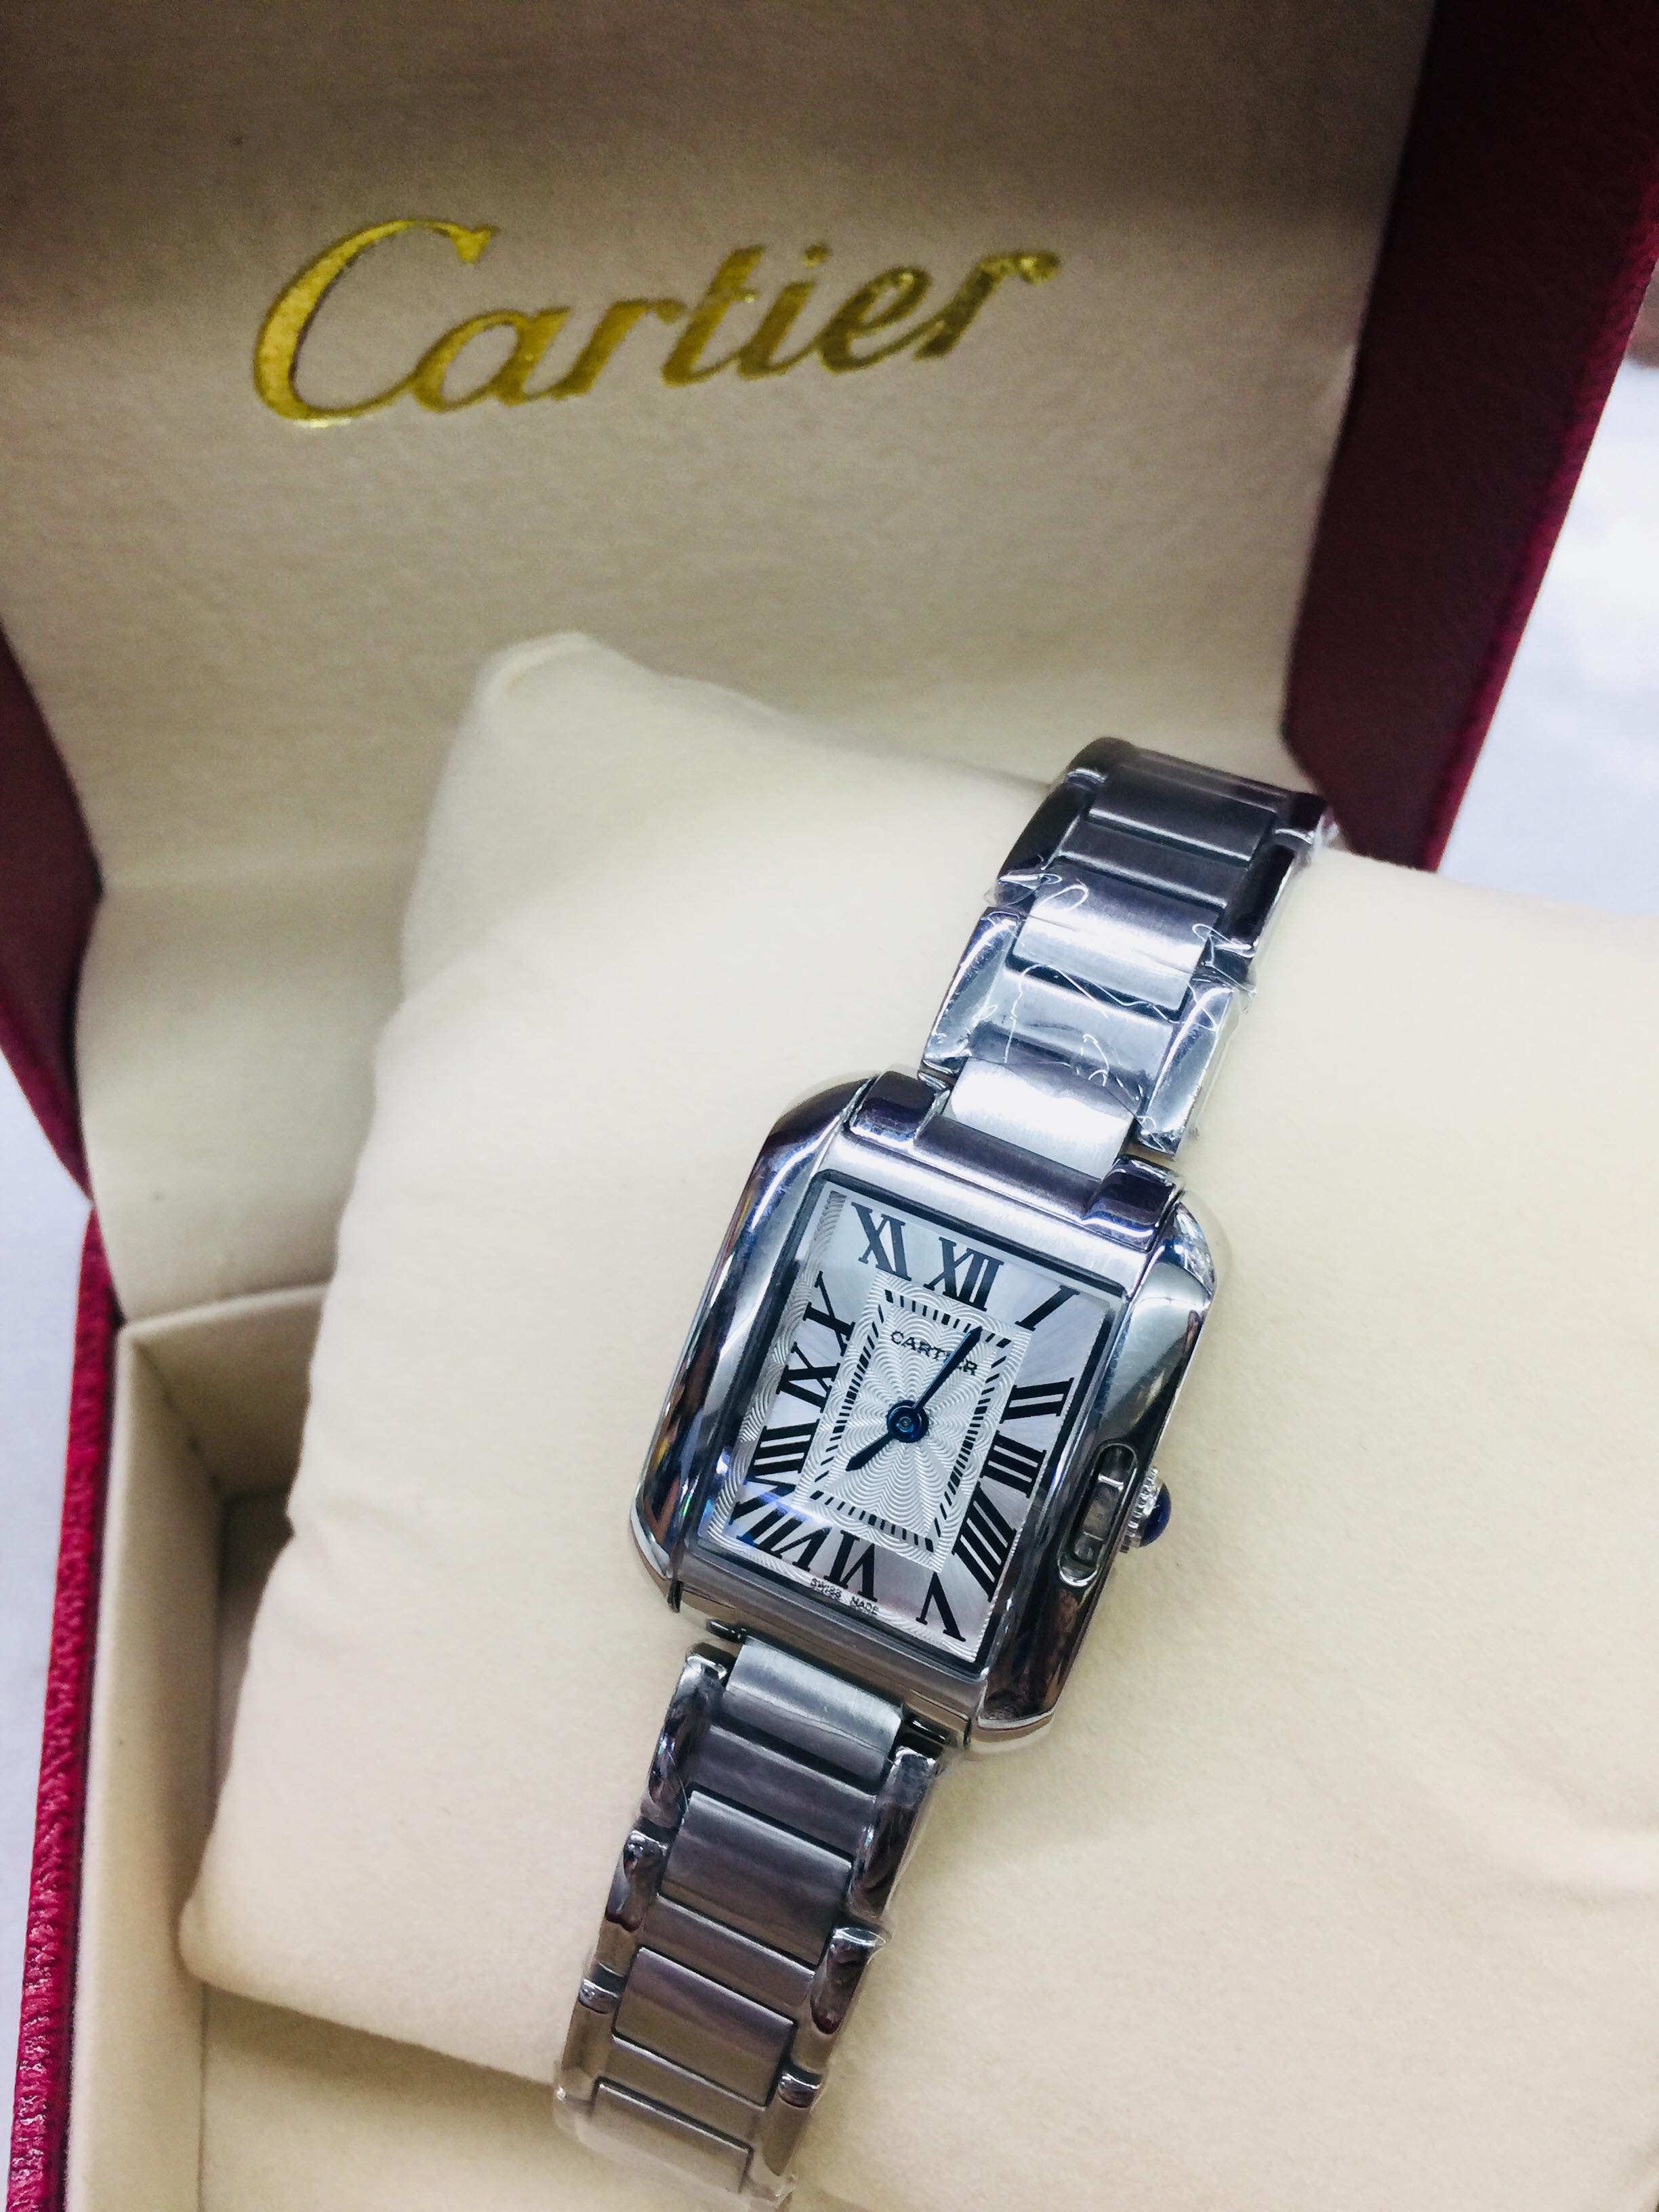 cartier tank solo price philippines